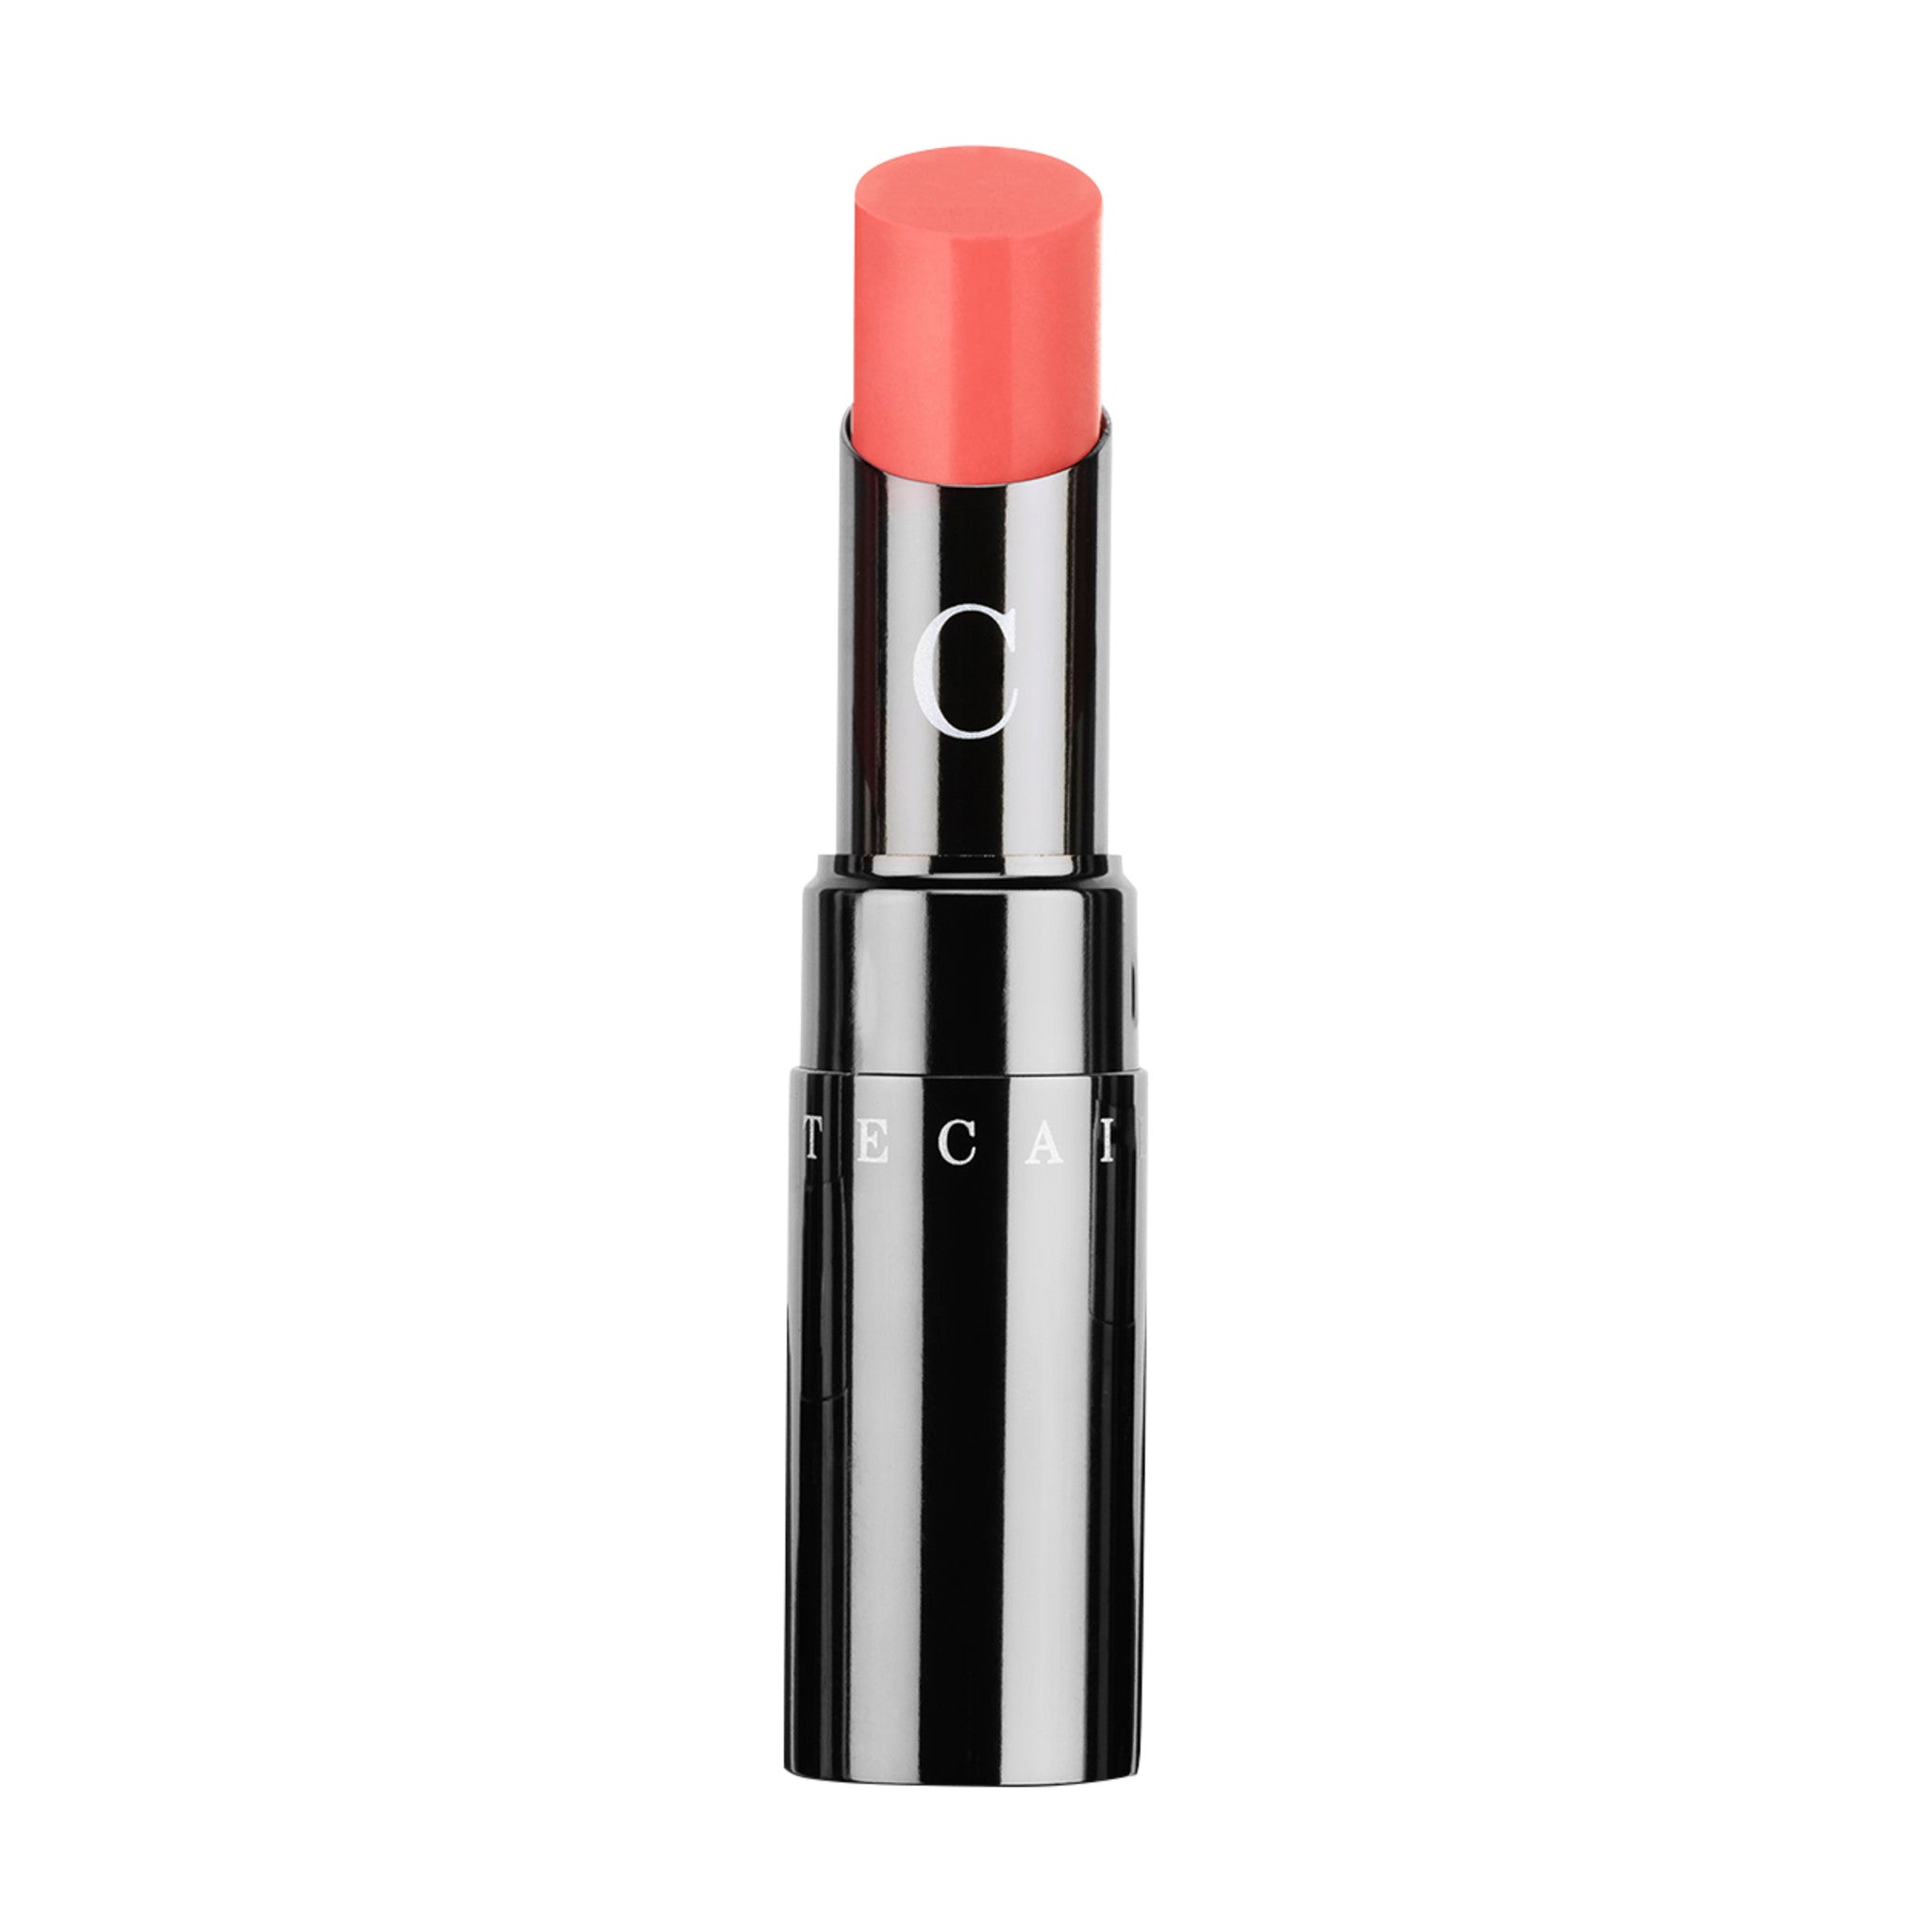 Chantecaille Lip Chic Lipstick Color/Shade variant: Lily main image. This product is in the color red